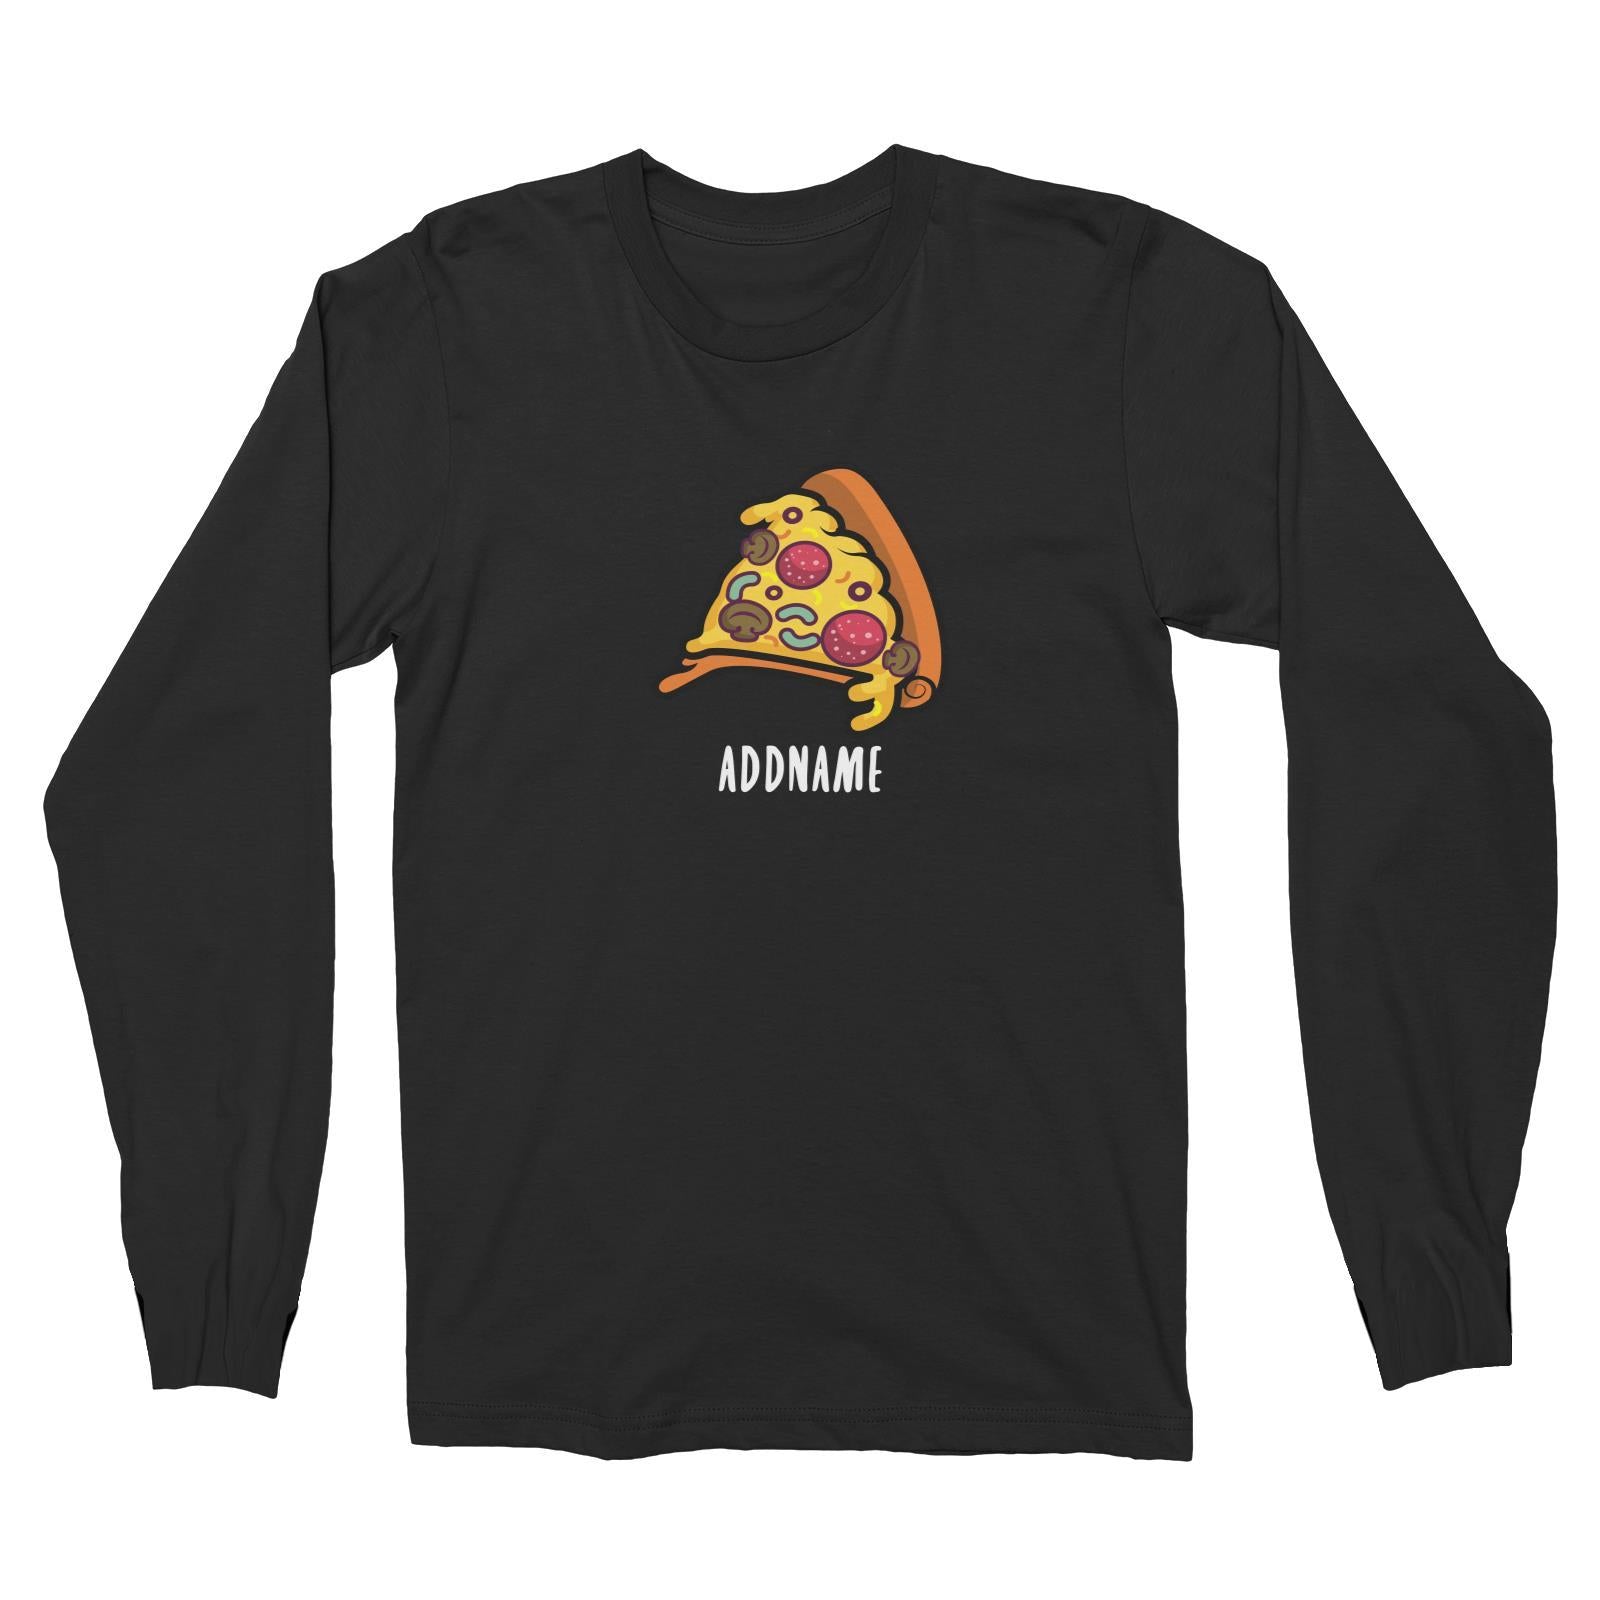 Fast Food Pizza Slice Addname Long Sleeve Unisex T-Shirt  Matching Family Comic Cartoon Personalizable Designs